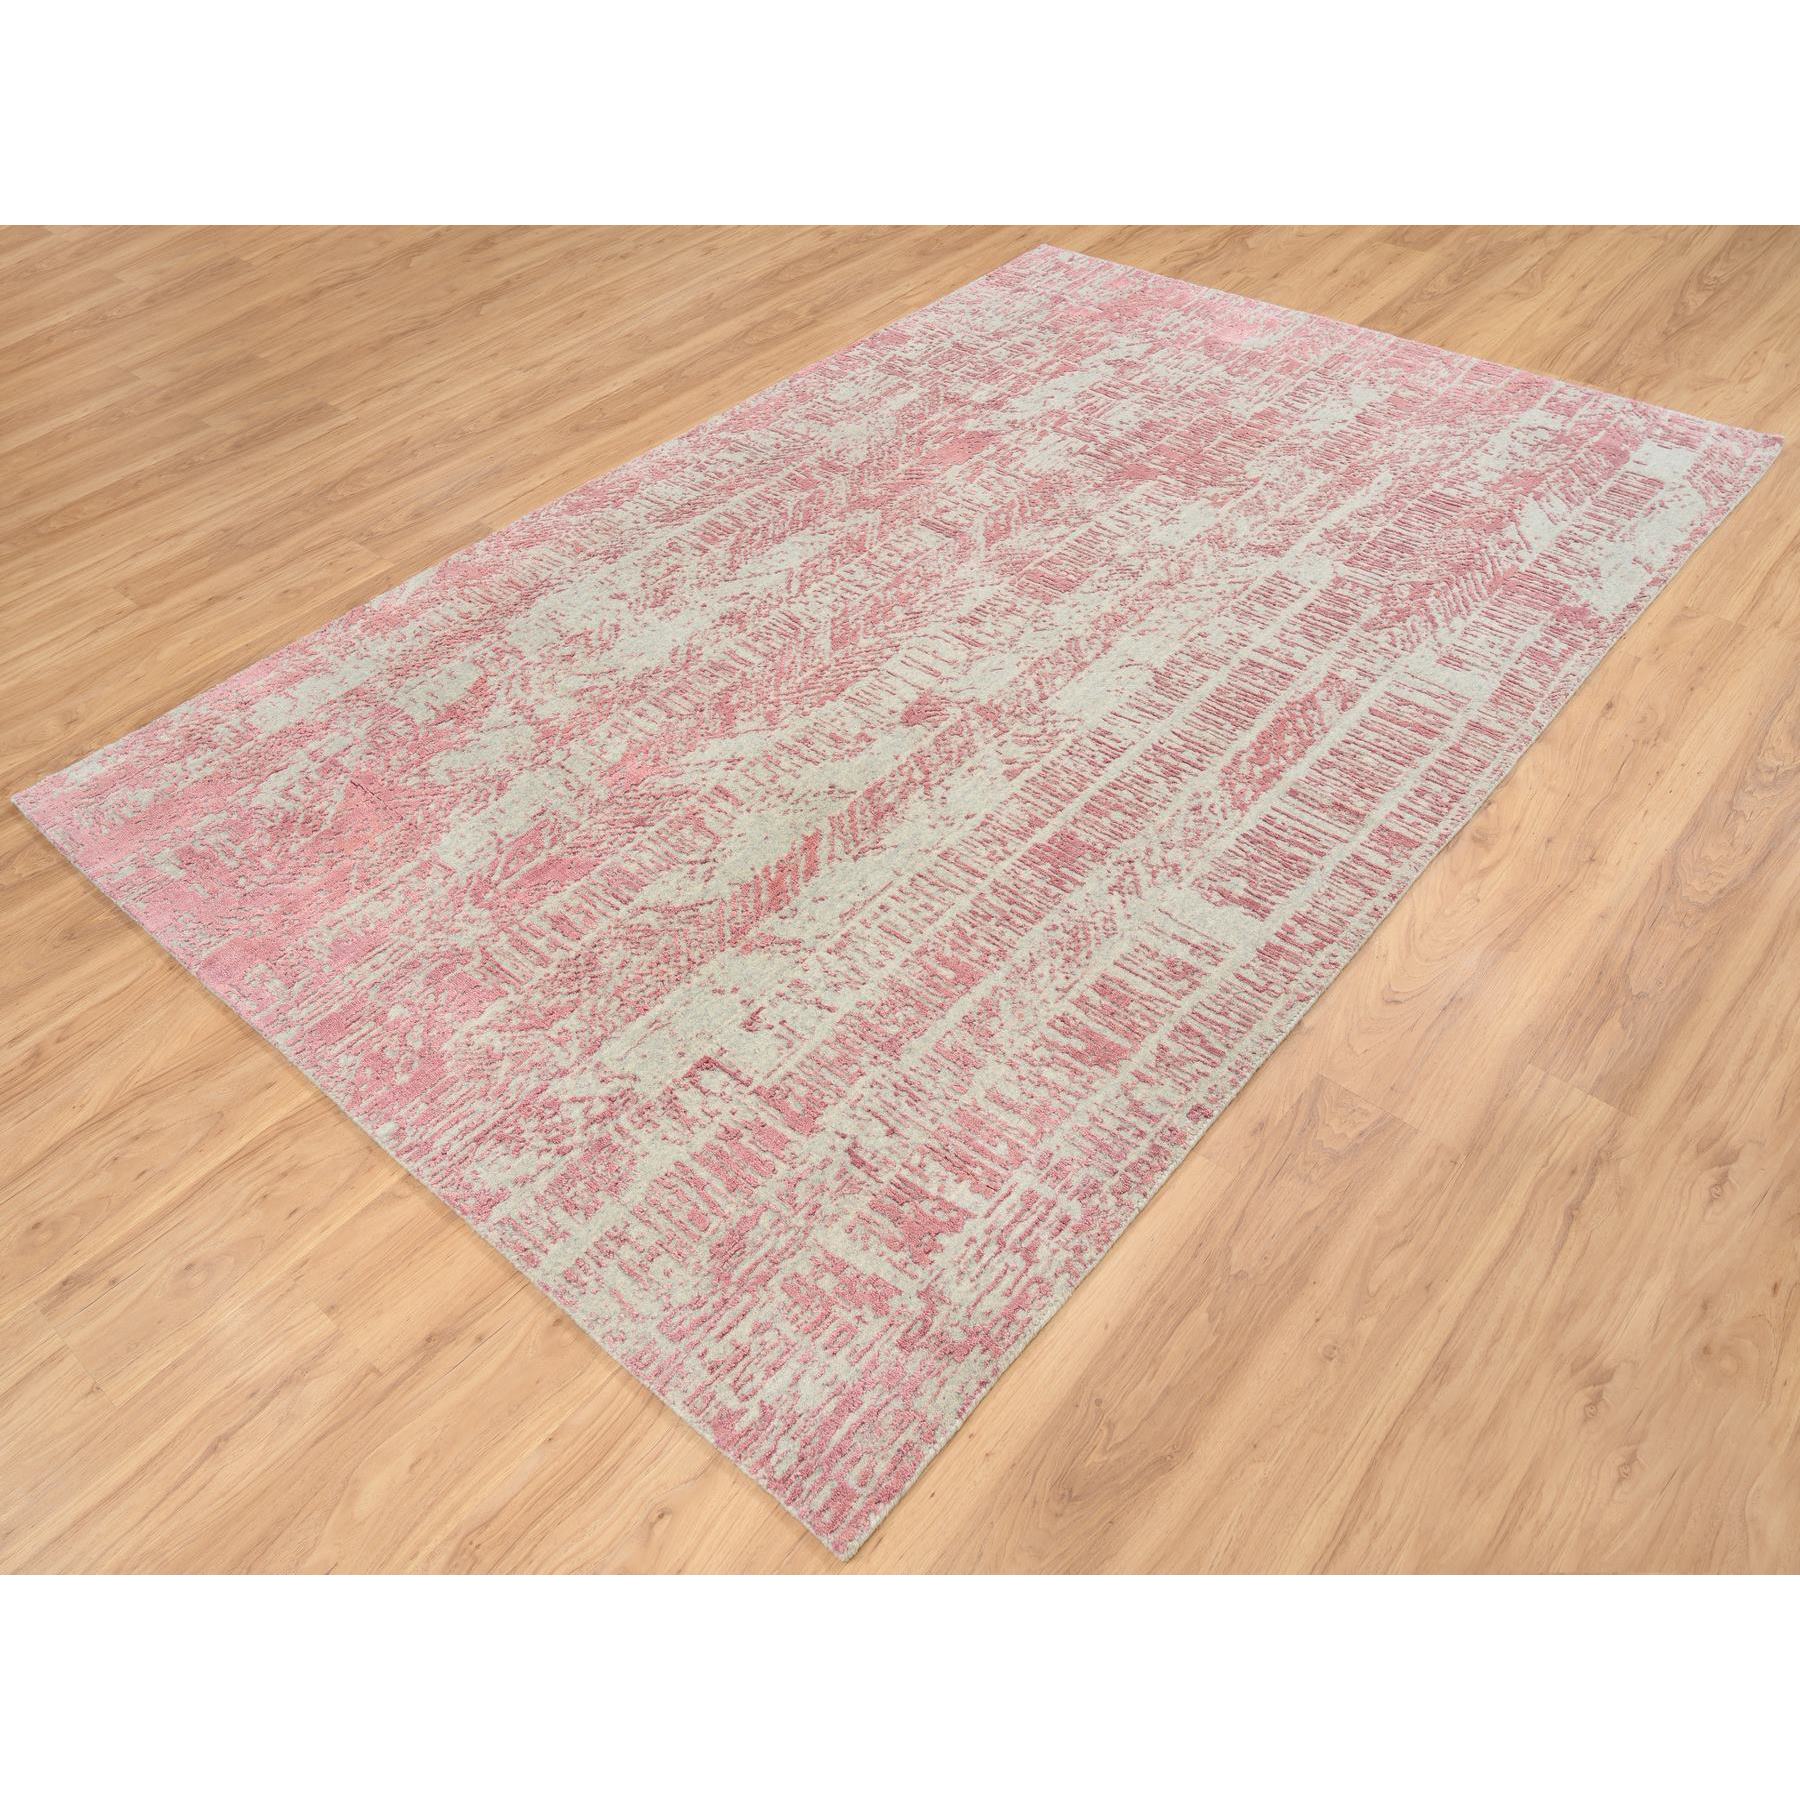 6'x9'1" Rose Pink, All Over Design, Wool and Art Silk, Jacquard Hand Loomed, Oriental Rug 